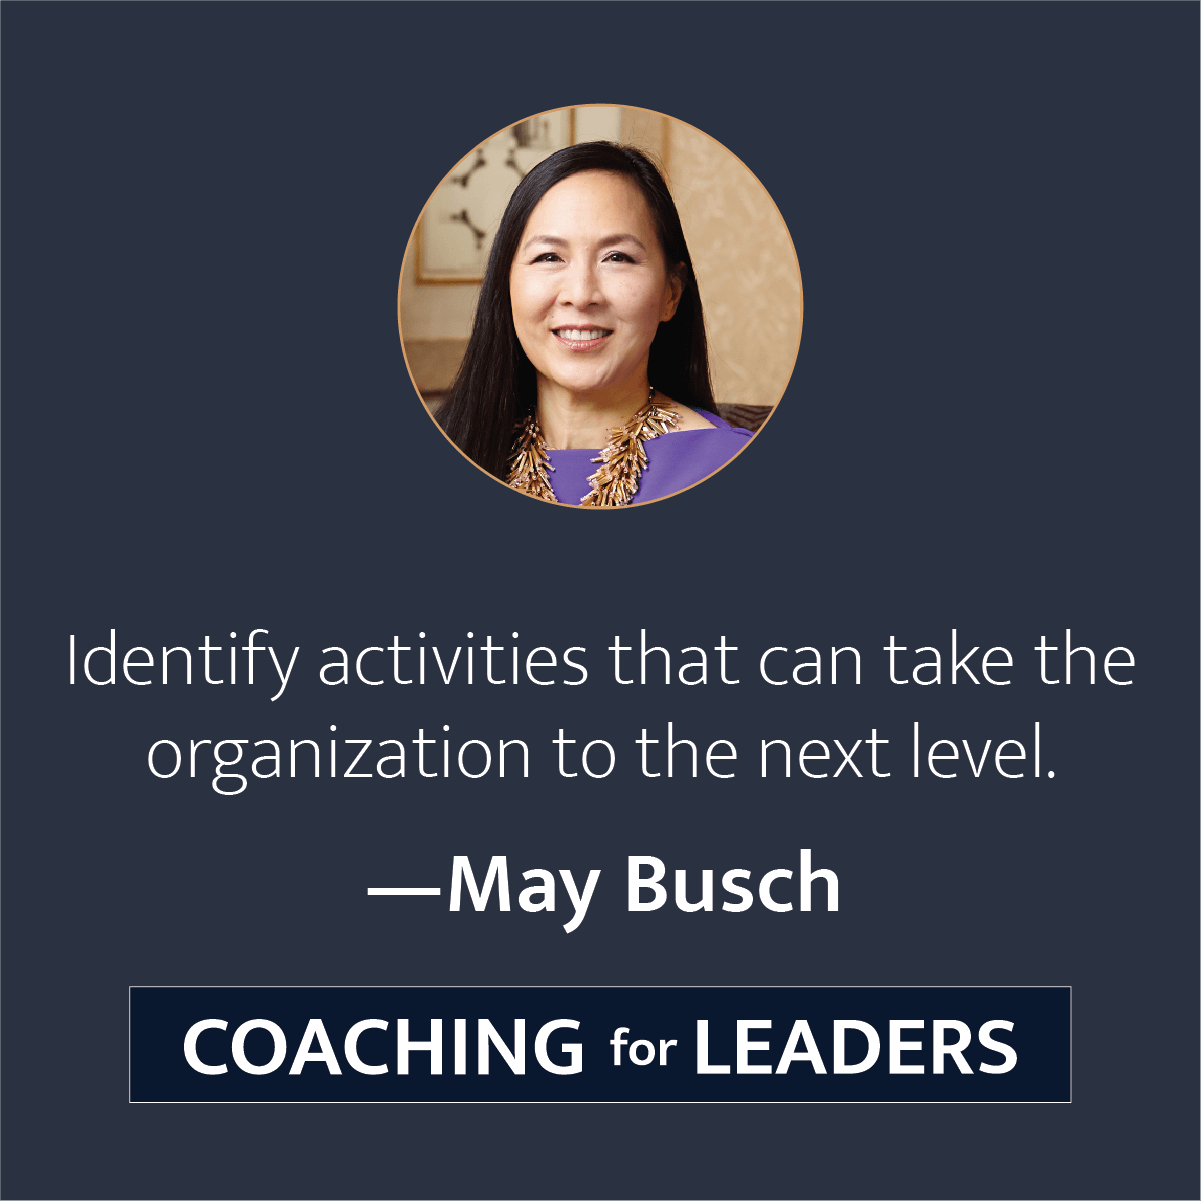 Identify activities the can take the organization to the next level.